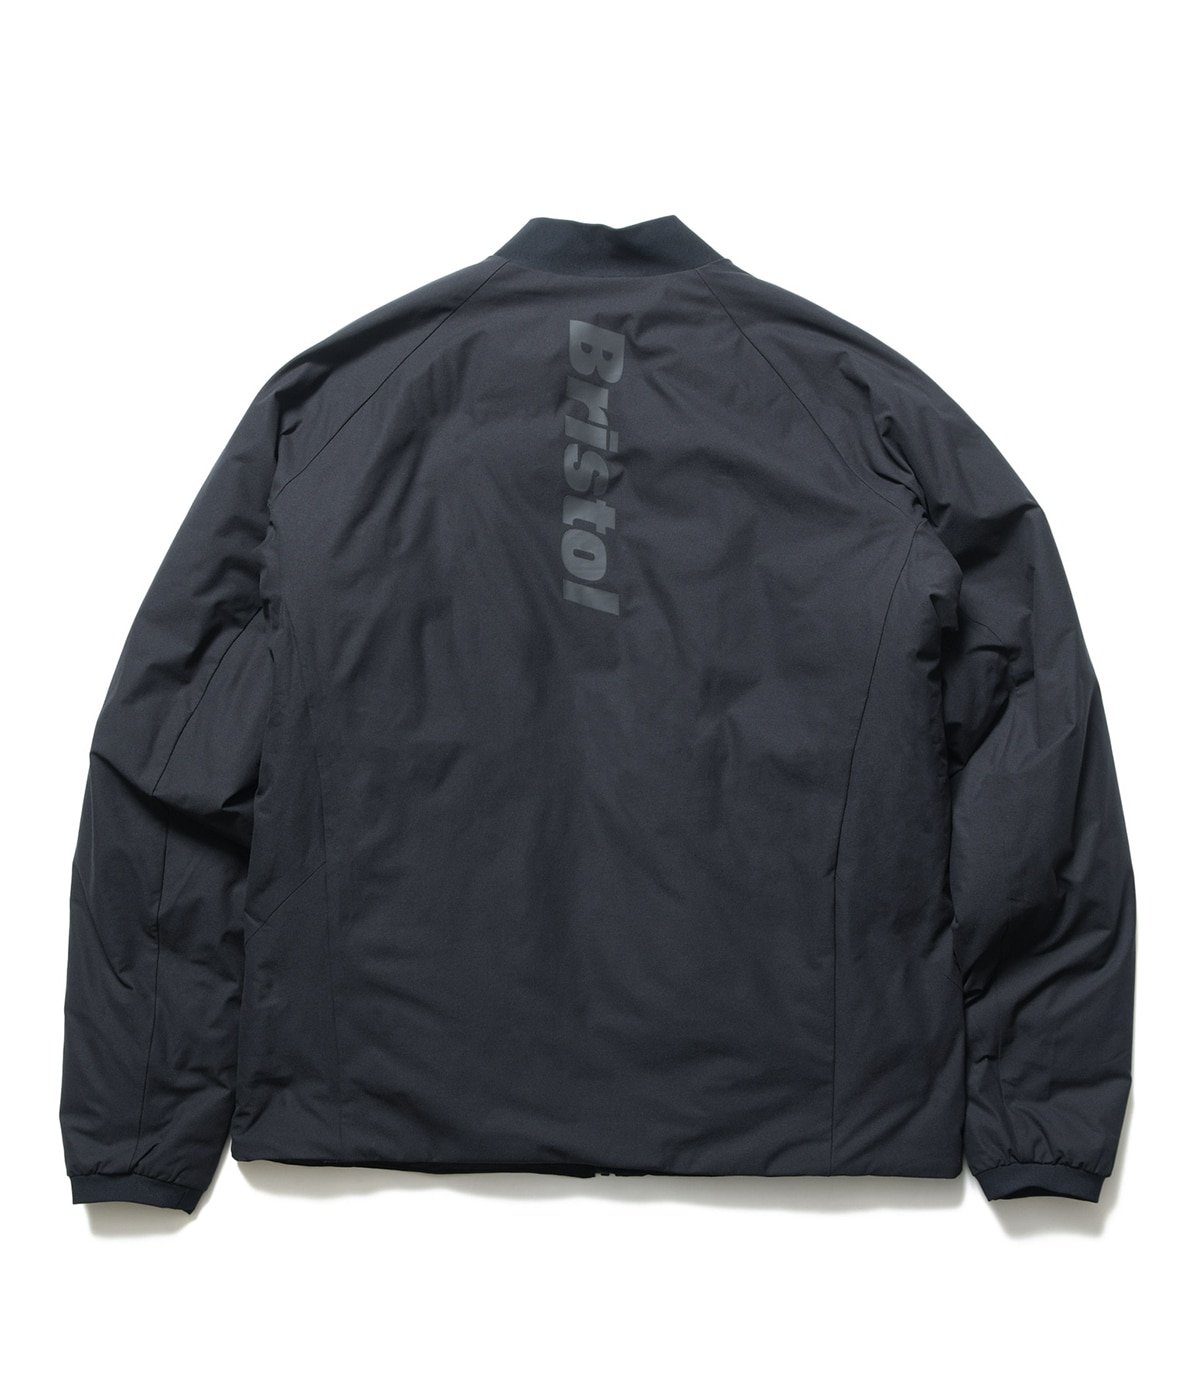 STRETCH LIGHT WEIGHT INSULATION PADDED ACTIVE JKT | F.C.Real ...